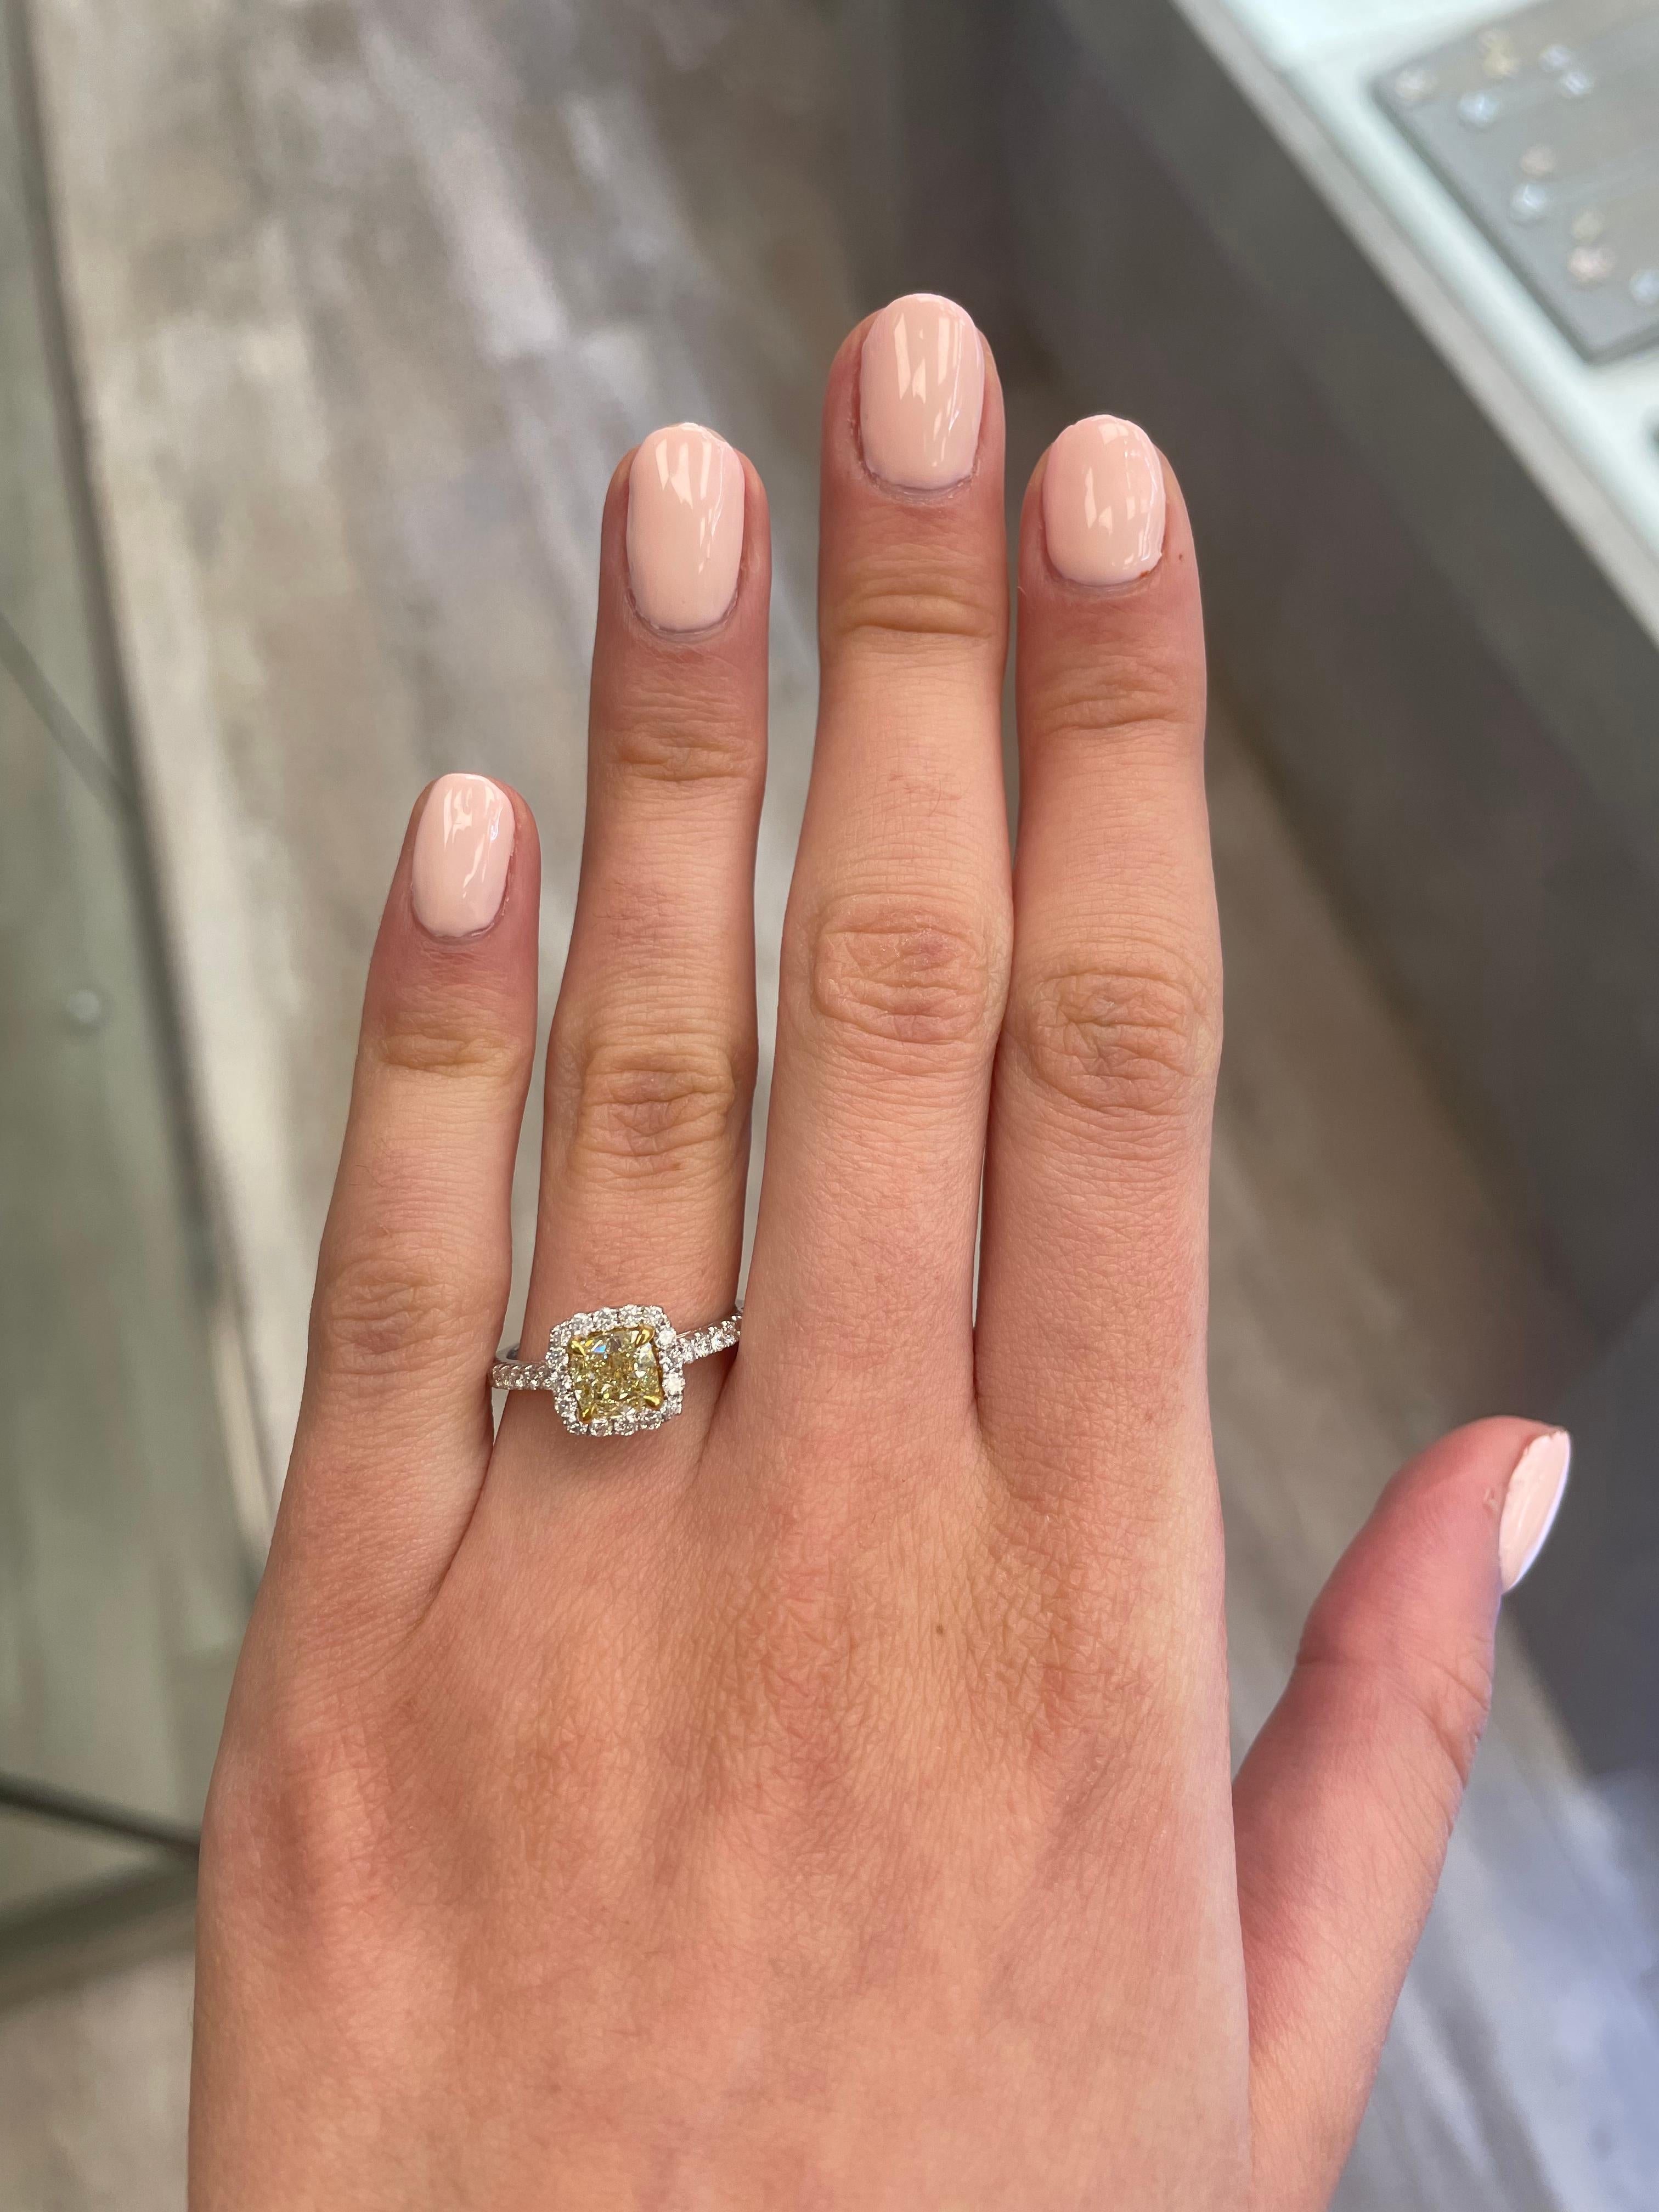 Stunning modern EGL certified yellow diamond with halo ring, two-tone 18k yellow and white gold. By Alexander Beverly Hills
1.53 carats total diamond weight.
1.03 carat cushion cut Fancy Vivid Yellow color and SI1 clarity diamond, EGL graded.